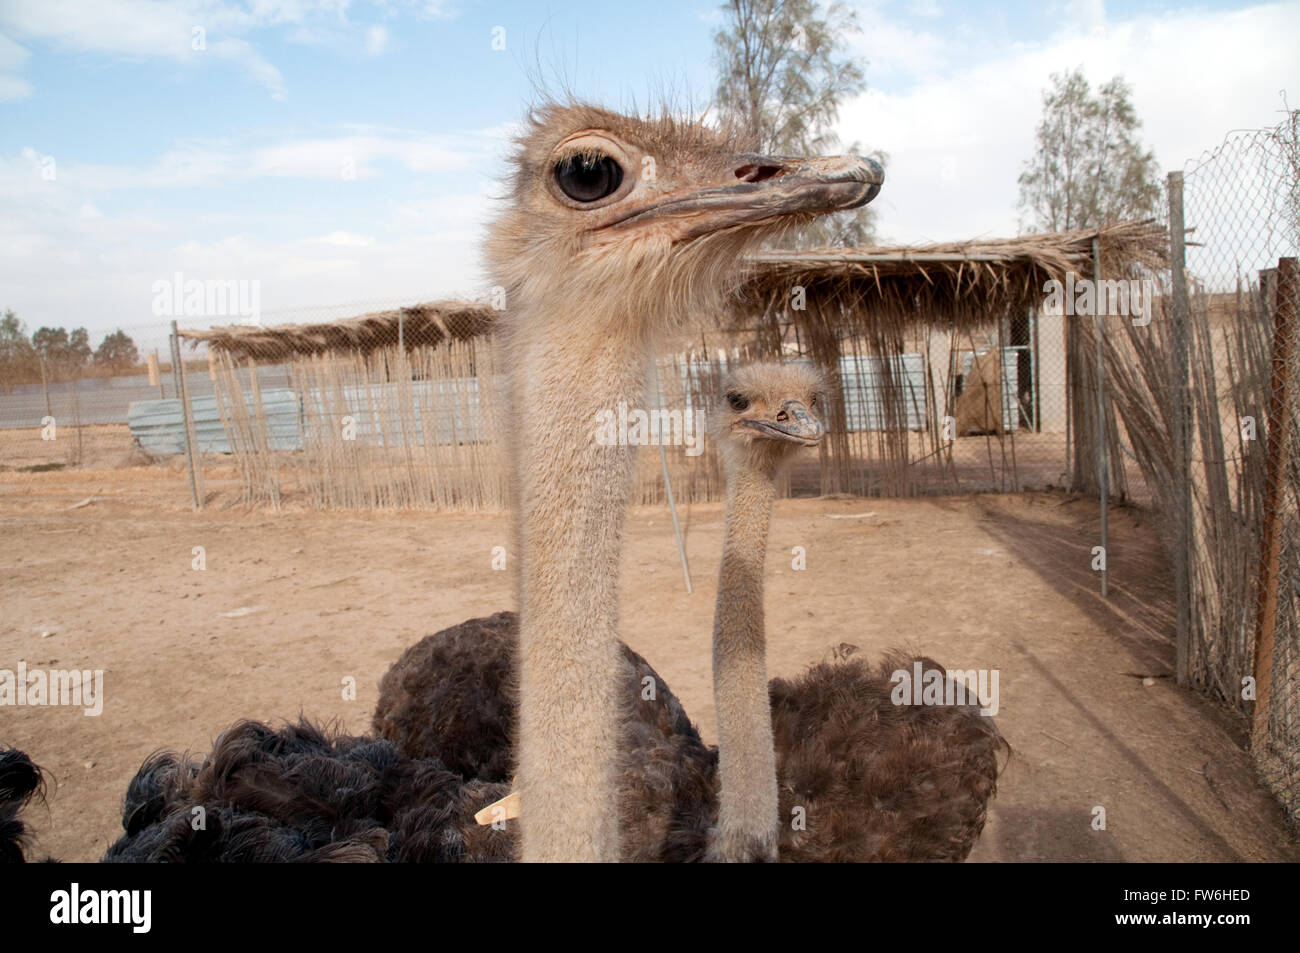 Two Somali ostriches at the Shaumari Wildlife Reserve near Azraq, Jordan, Middle East. Stock Photo